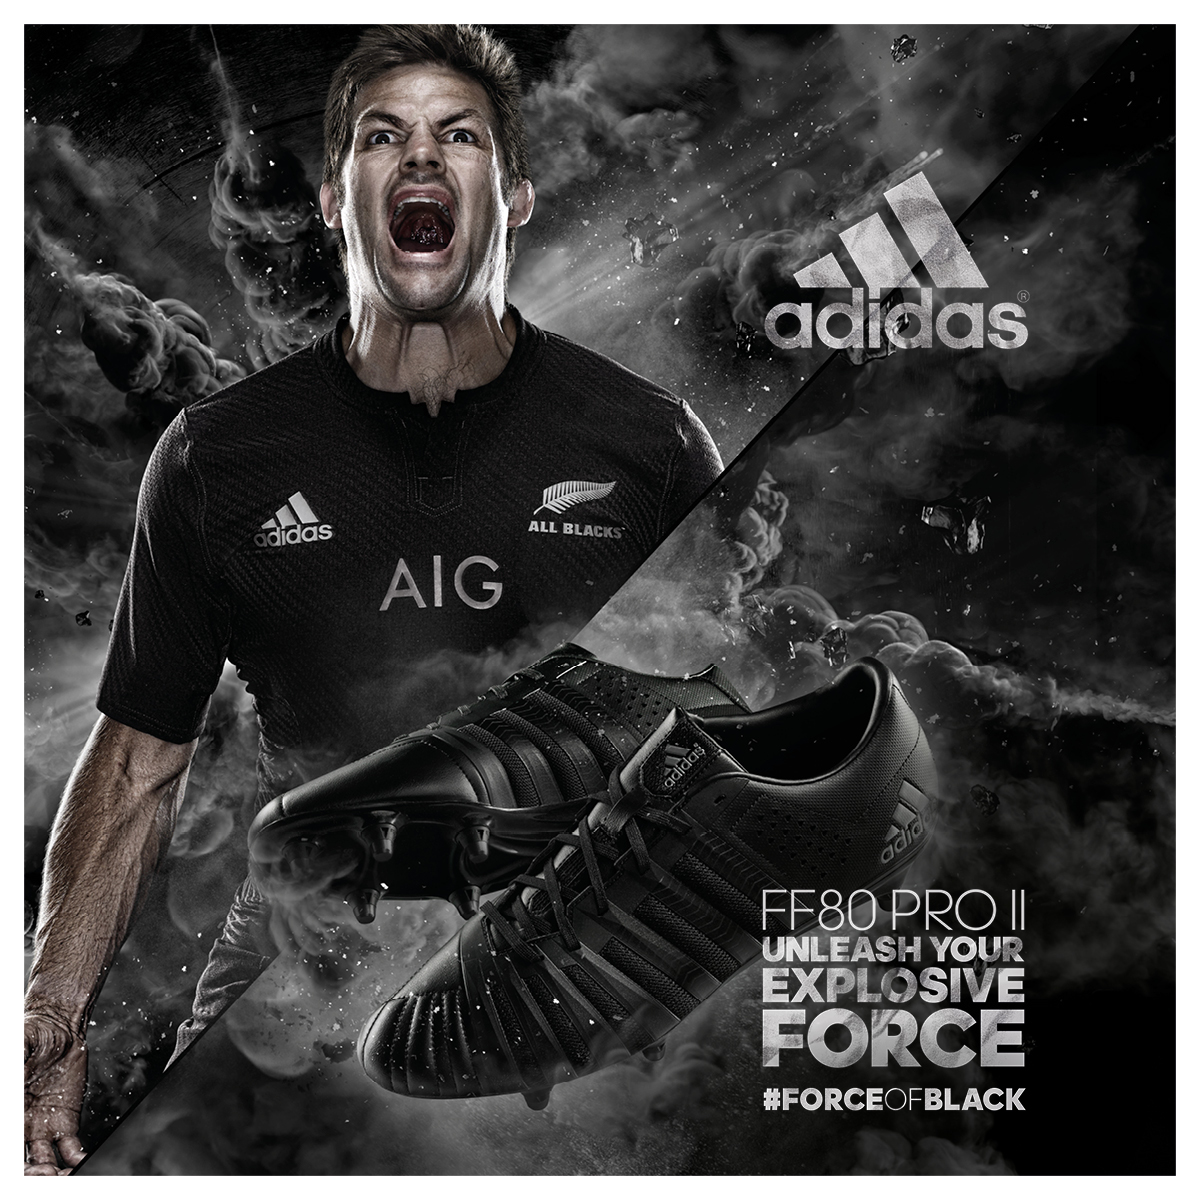 allblacks all blacks world cup unleash your force adidas New Zealand iris worldwide England World Cup Rugby rugby world cup